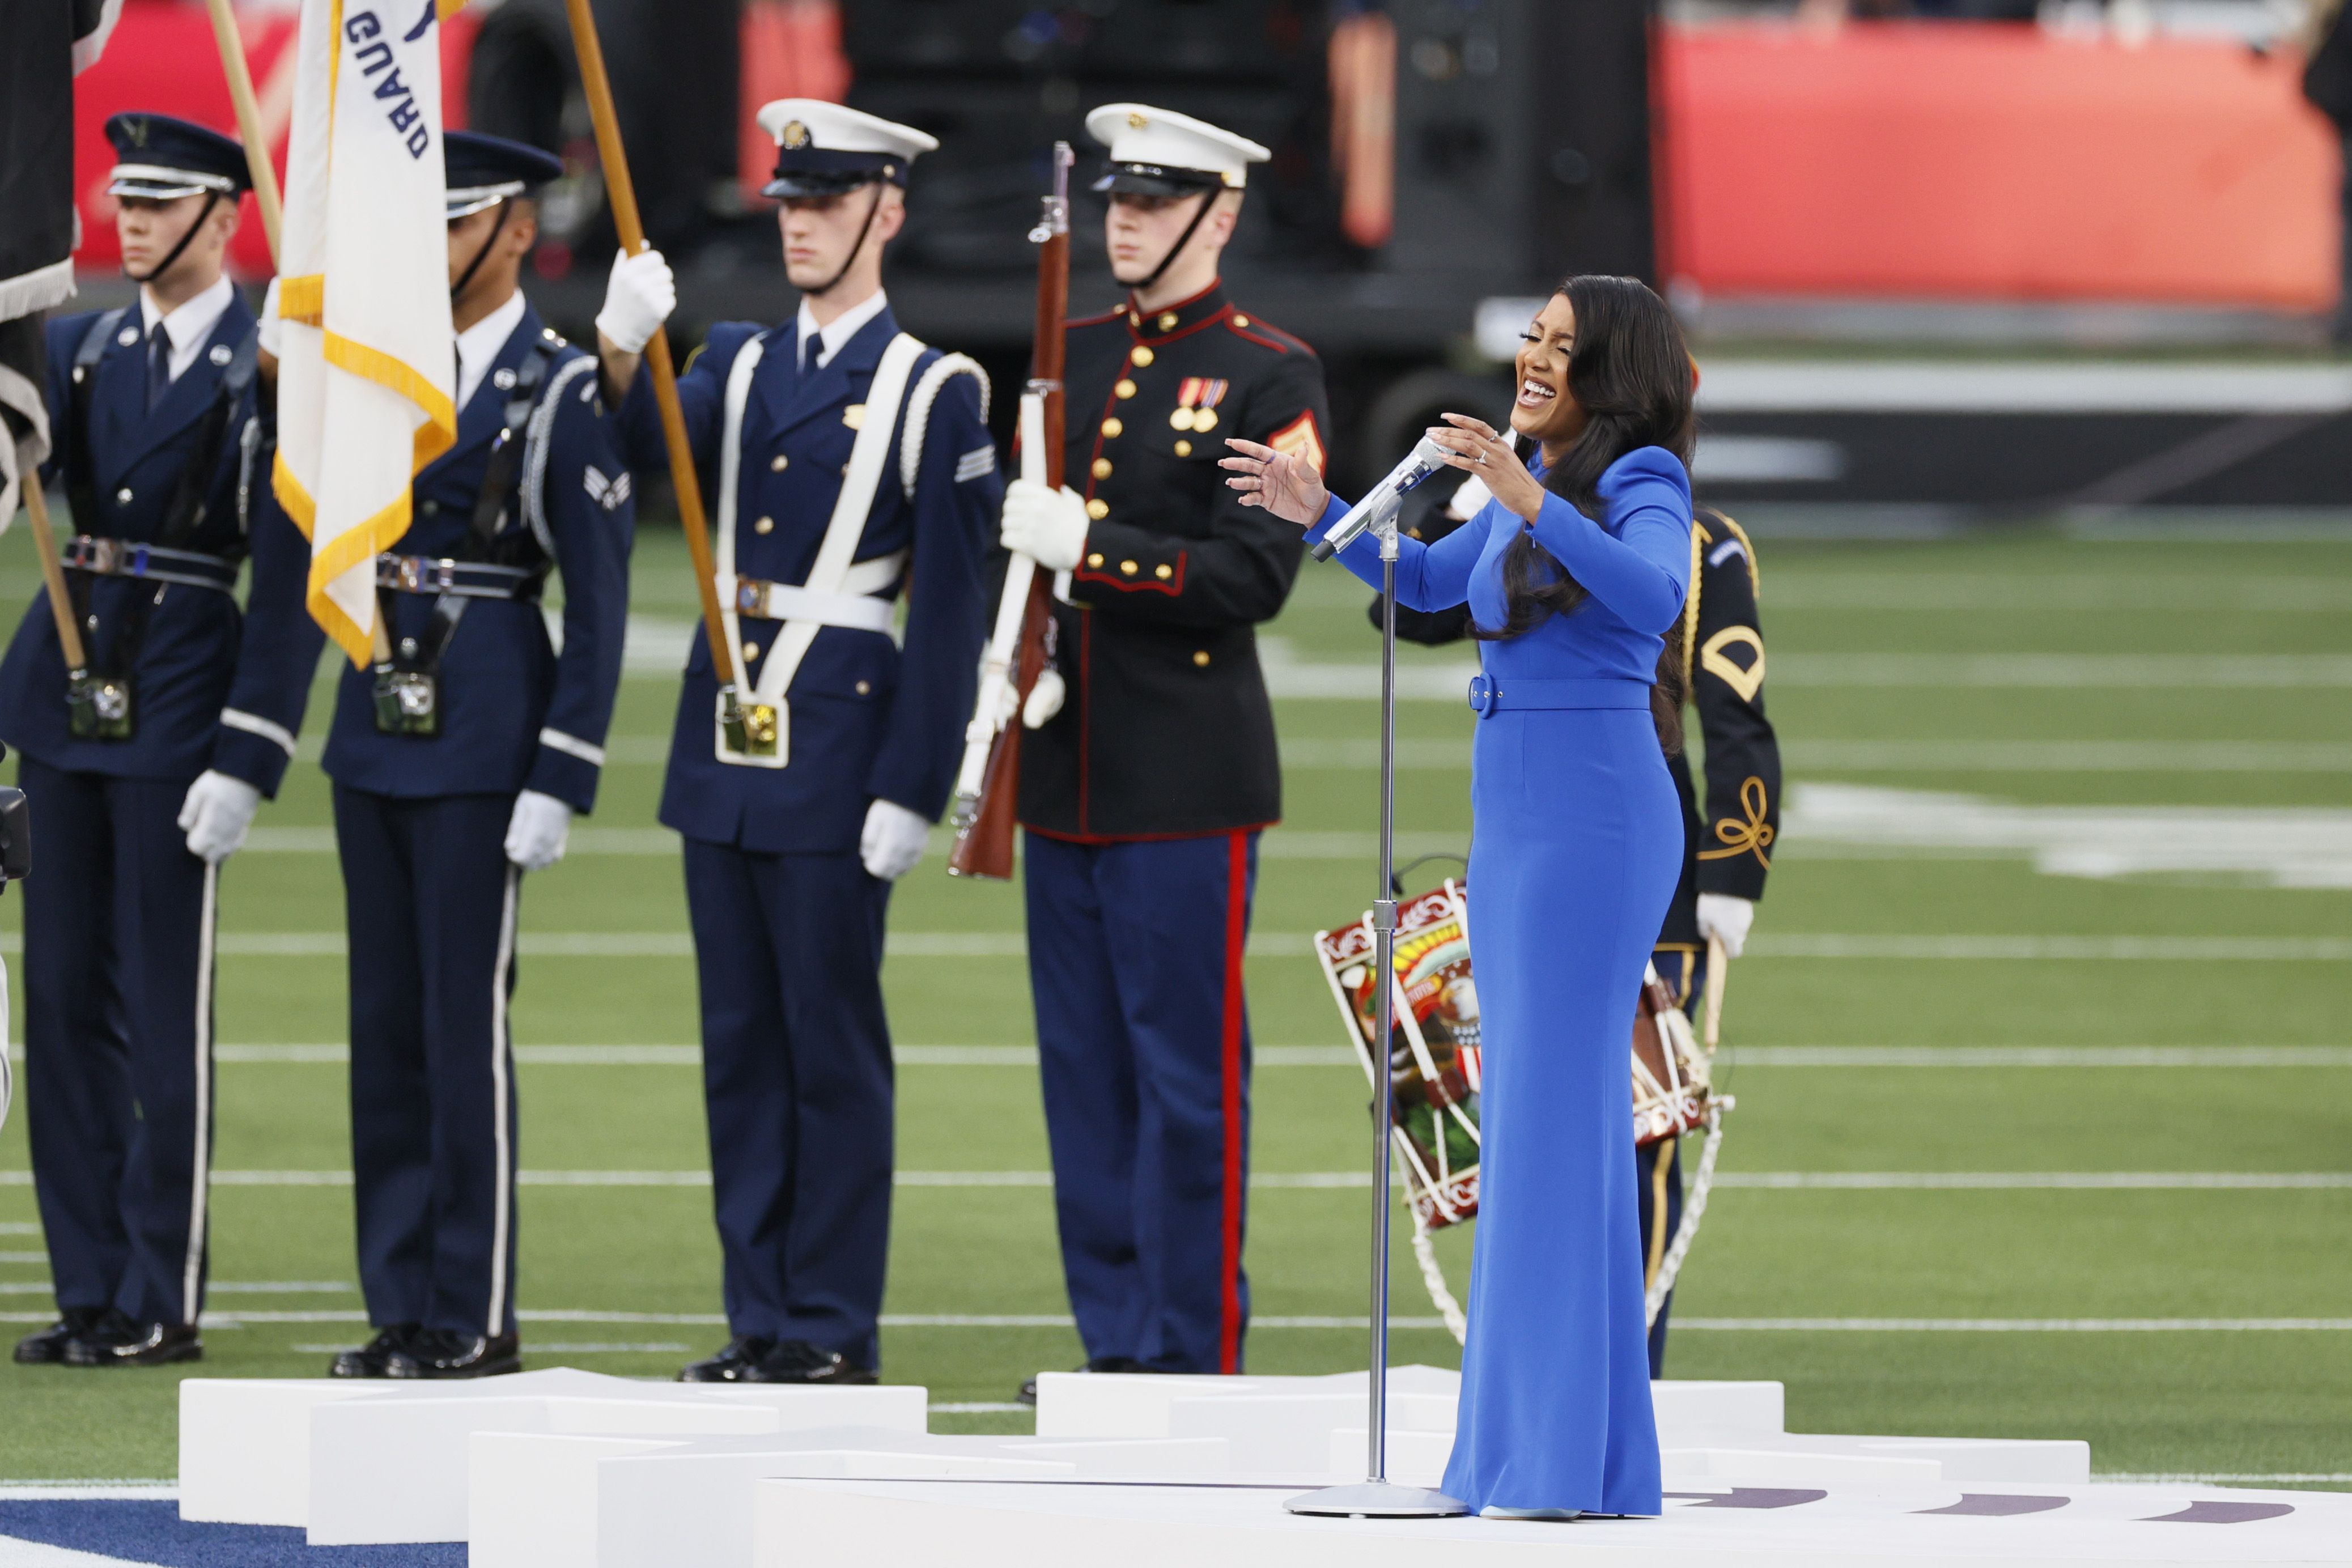 singer-mickey-guyton-performs-the-national-anthem-before-news-photo-1644796405.jpg